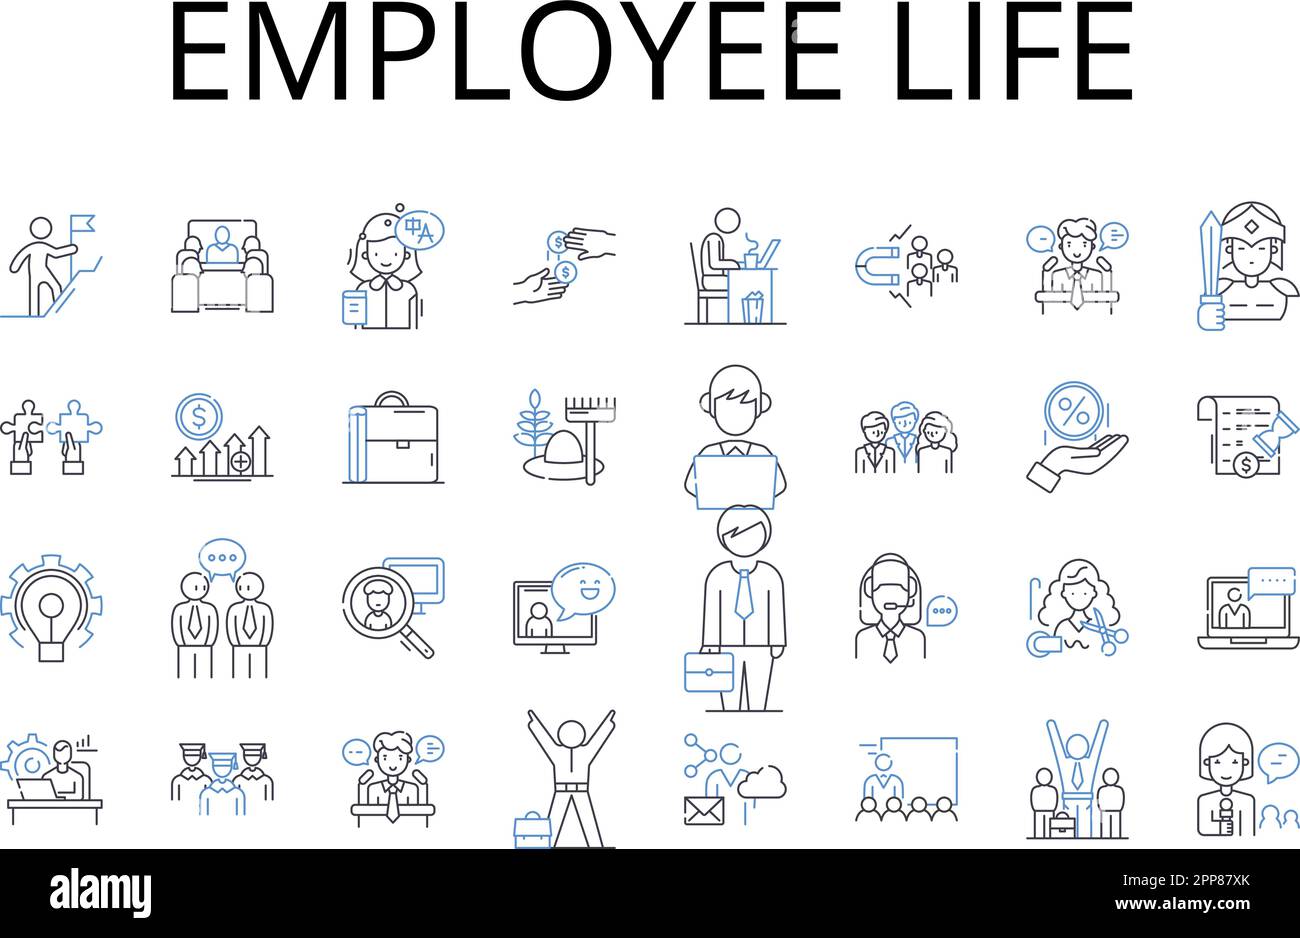 Employee life line icons collection. Job security, Workspace wellness, Career milests, Work culture, Staff relations, Labor conditions, Human capital Stock Vector